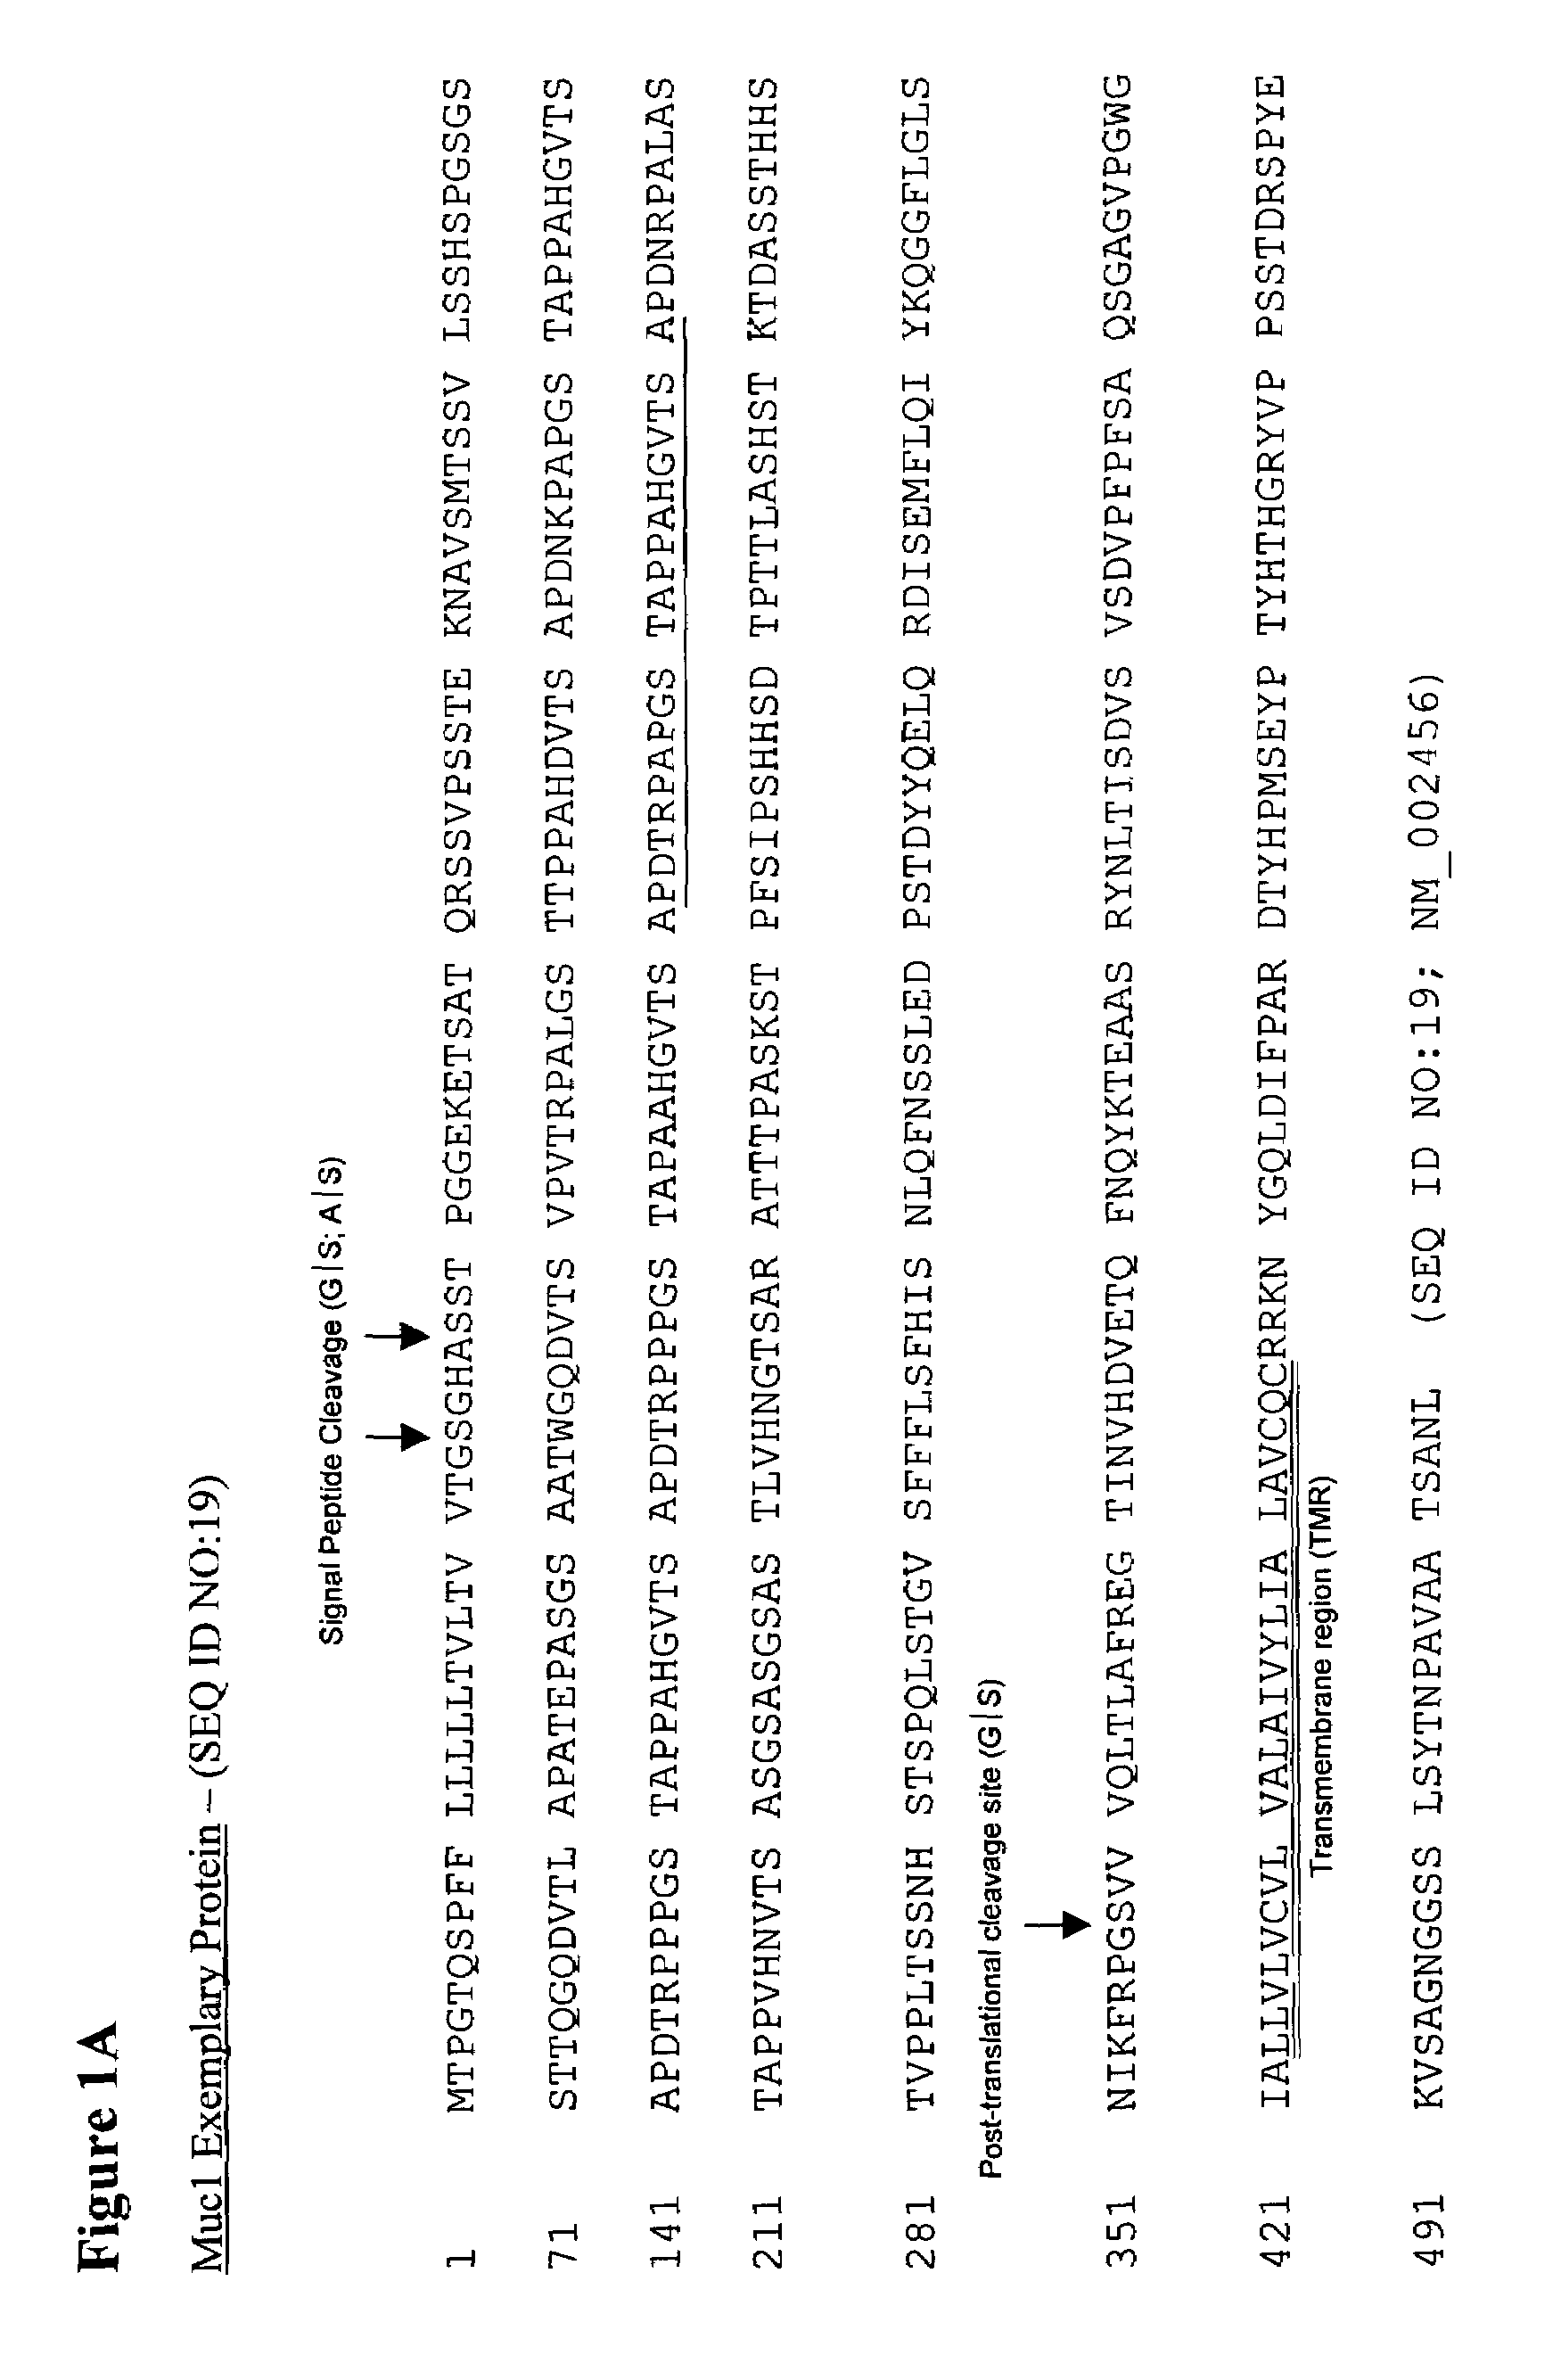 Antibodies to non-shed Muc1 and Muc16, and uses thereof